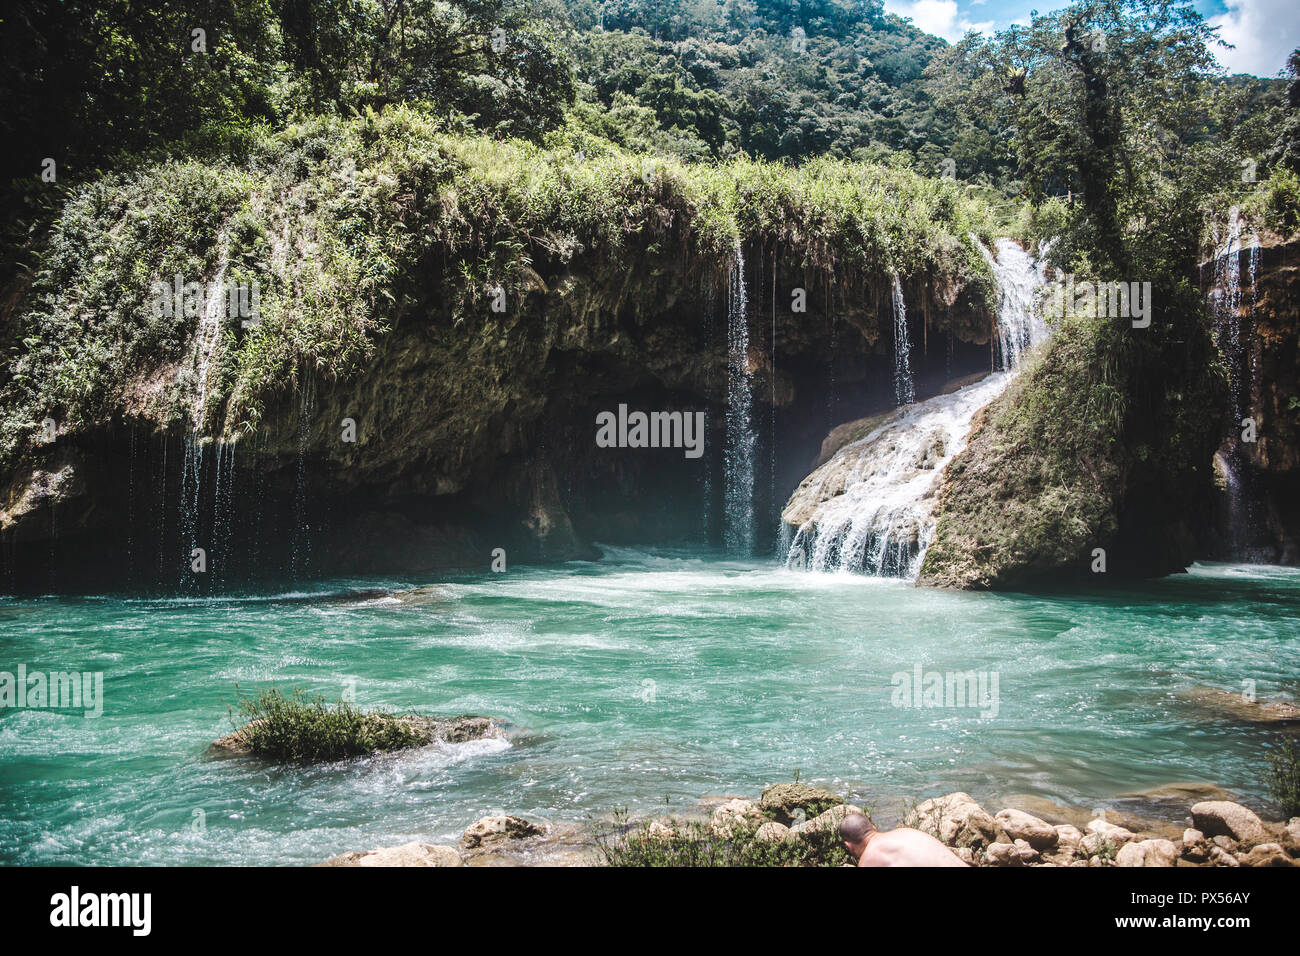 Beautiful, turquoise natural pools of Semuc Champey, a popular tourism destination in Guatemala Stock Photo